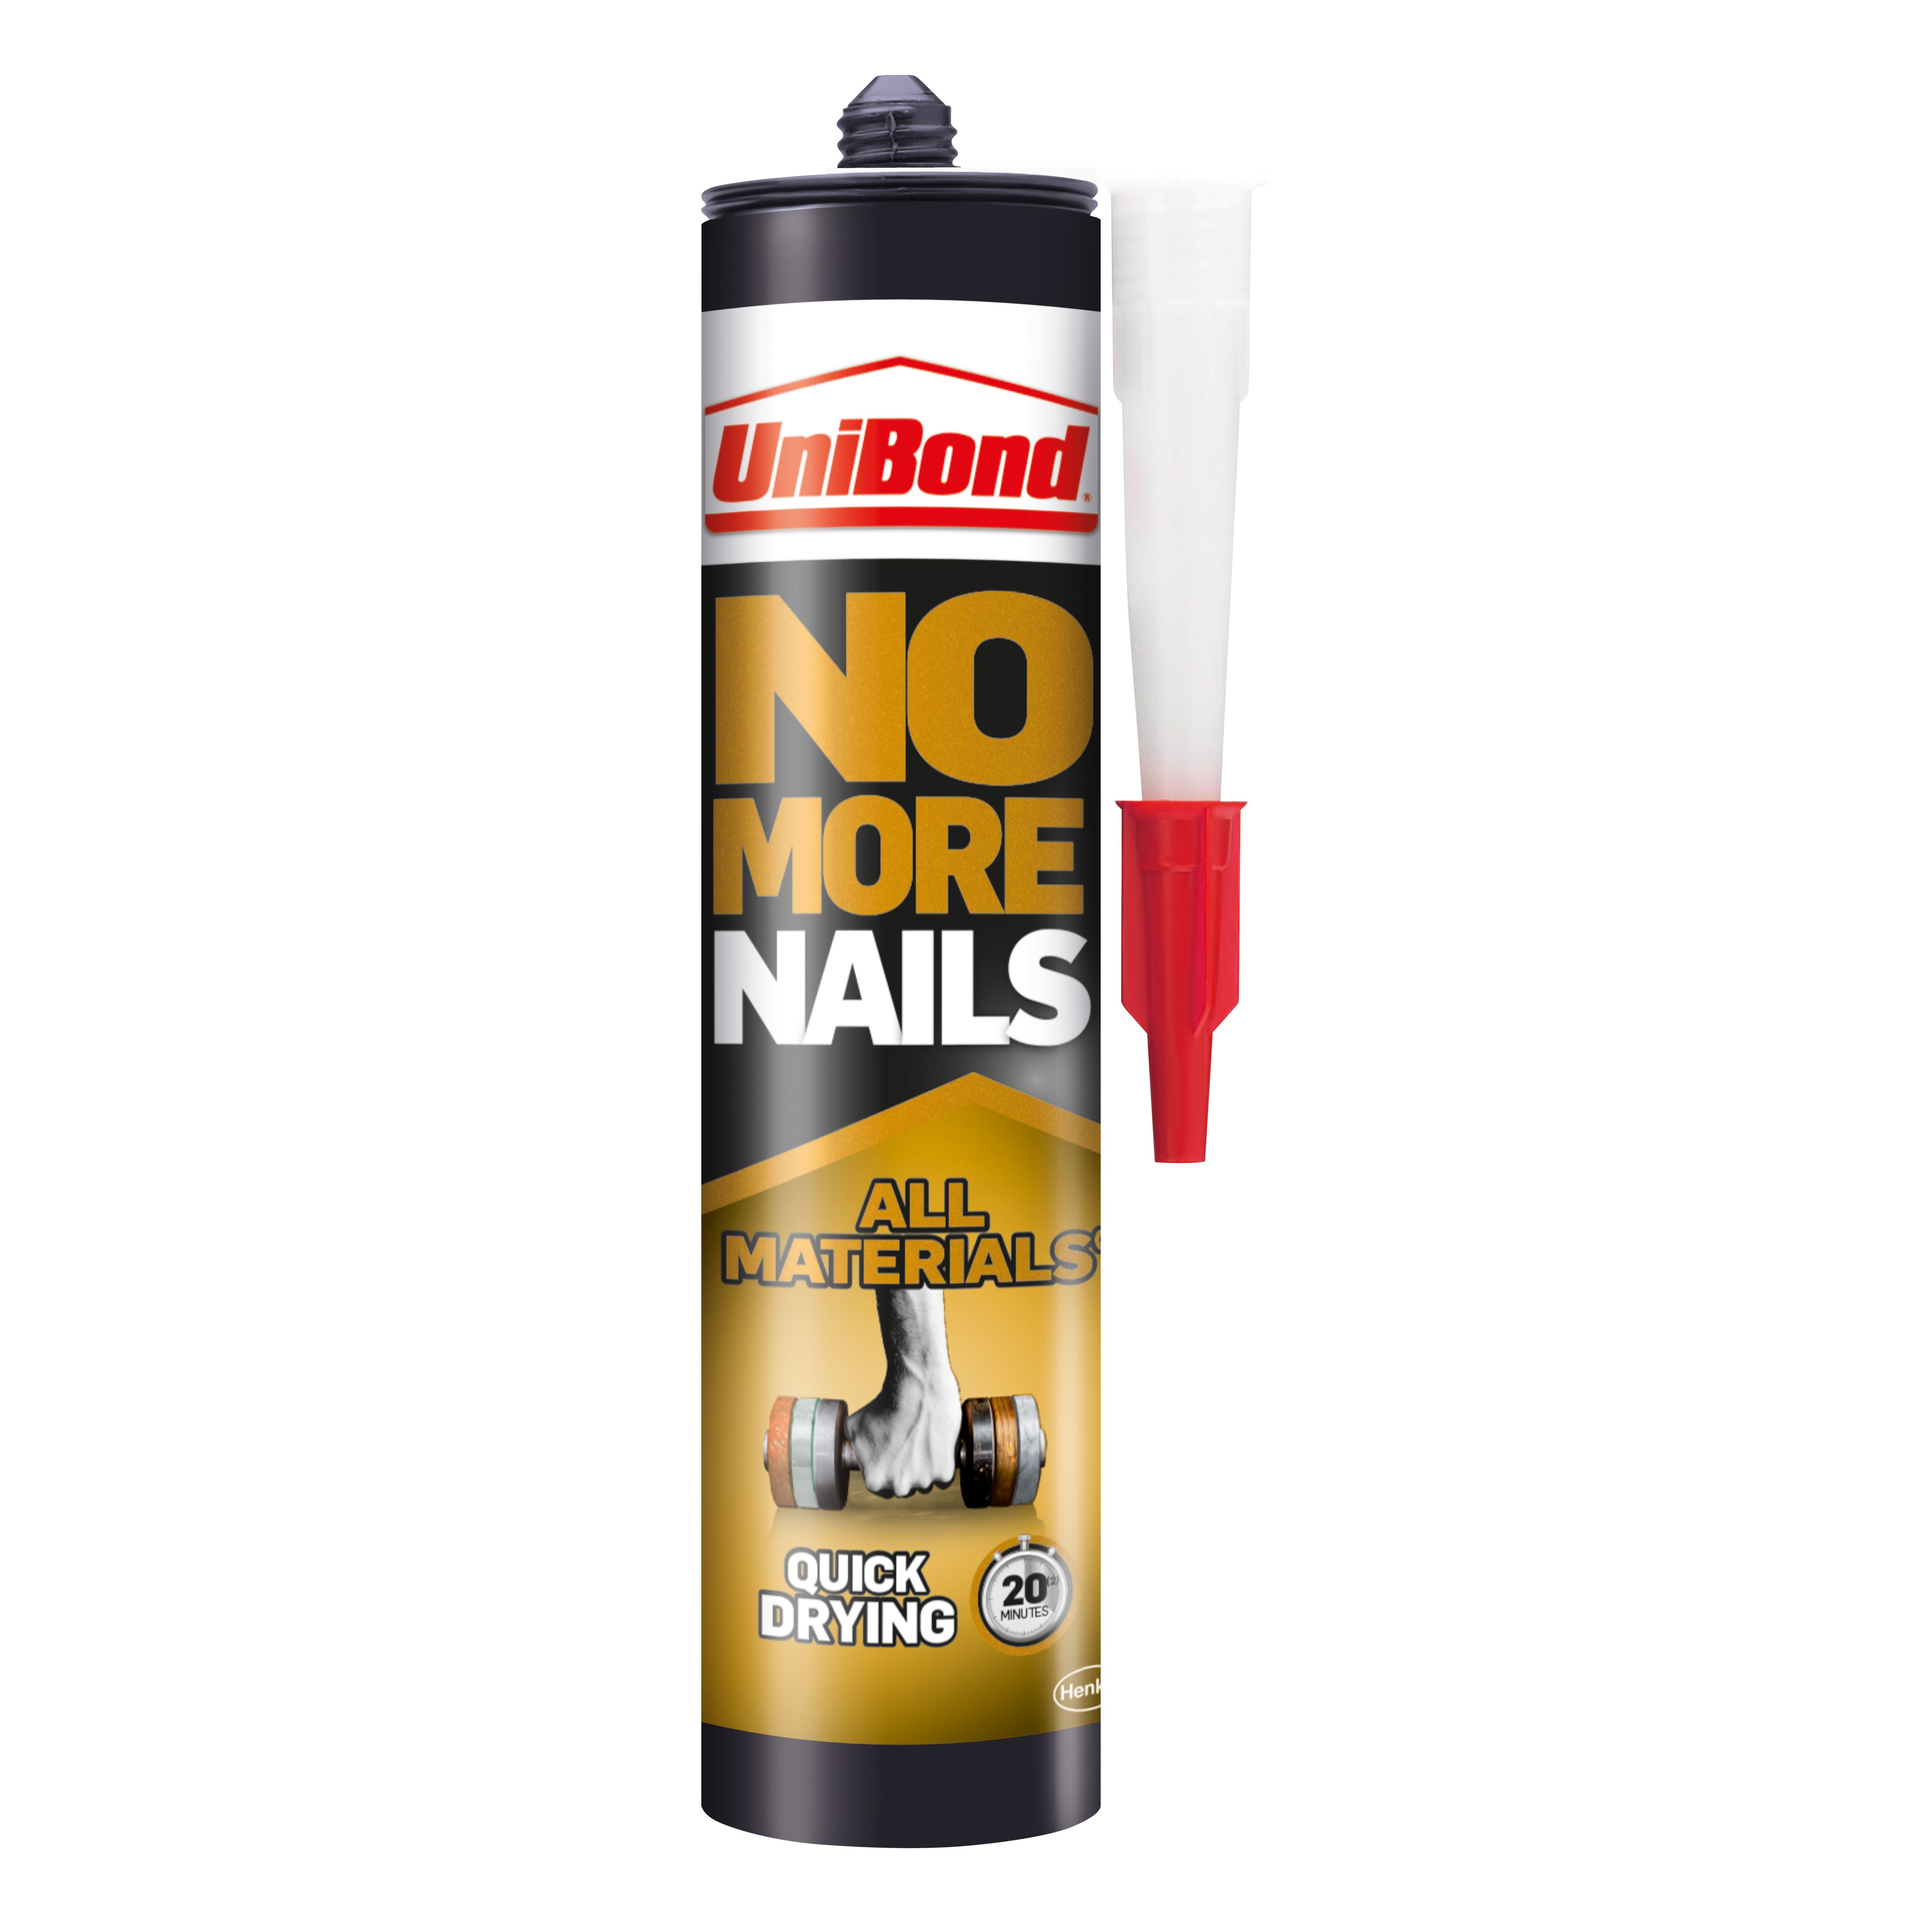 UniBond No More Nails Quick Drying Solvent-free White All materials Grab adhesive 390g